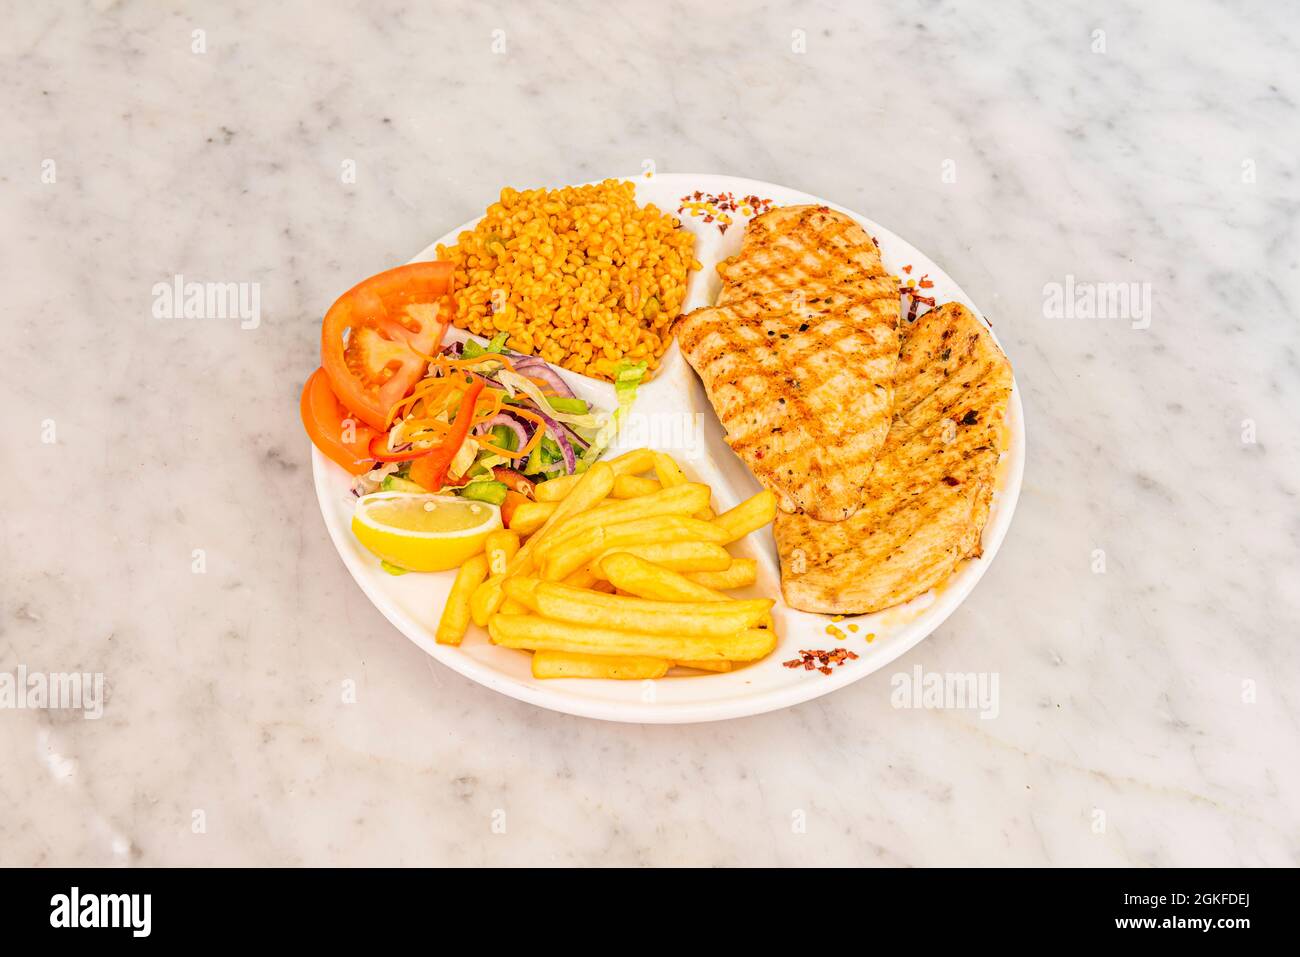 Menu plate in a Turkish restaurant with chicken fillet and side dishes of chips, salad and bulgur Stock Photo